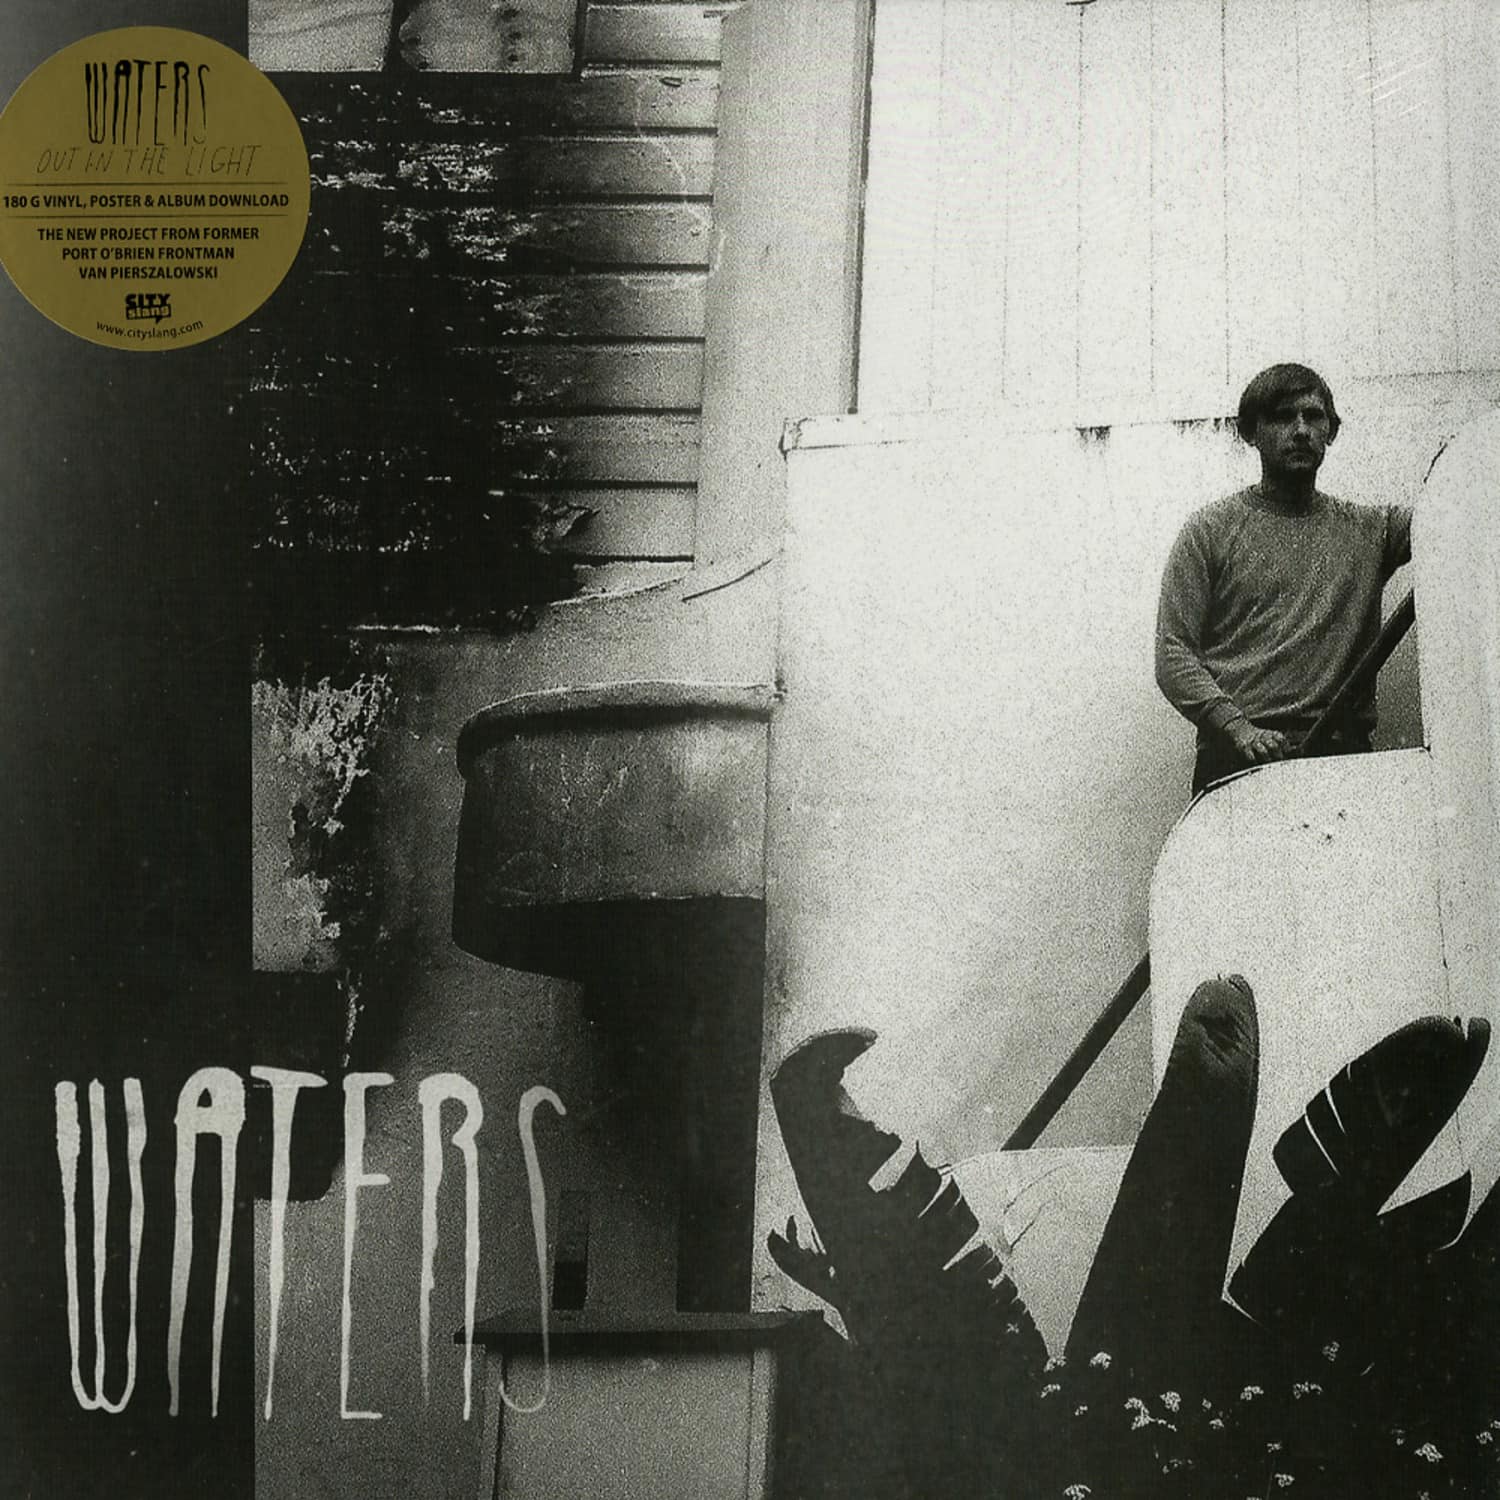 Waters - OUT IN THE LIGHT 